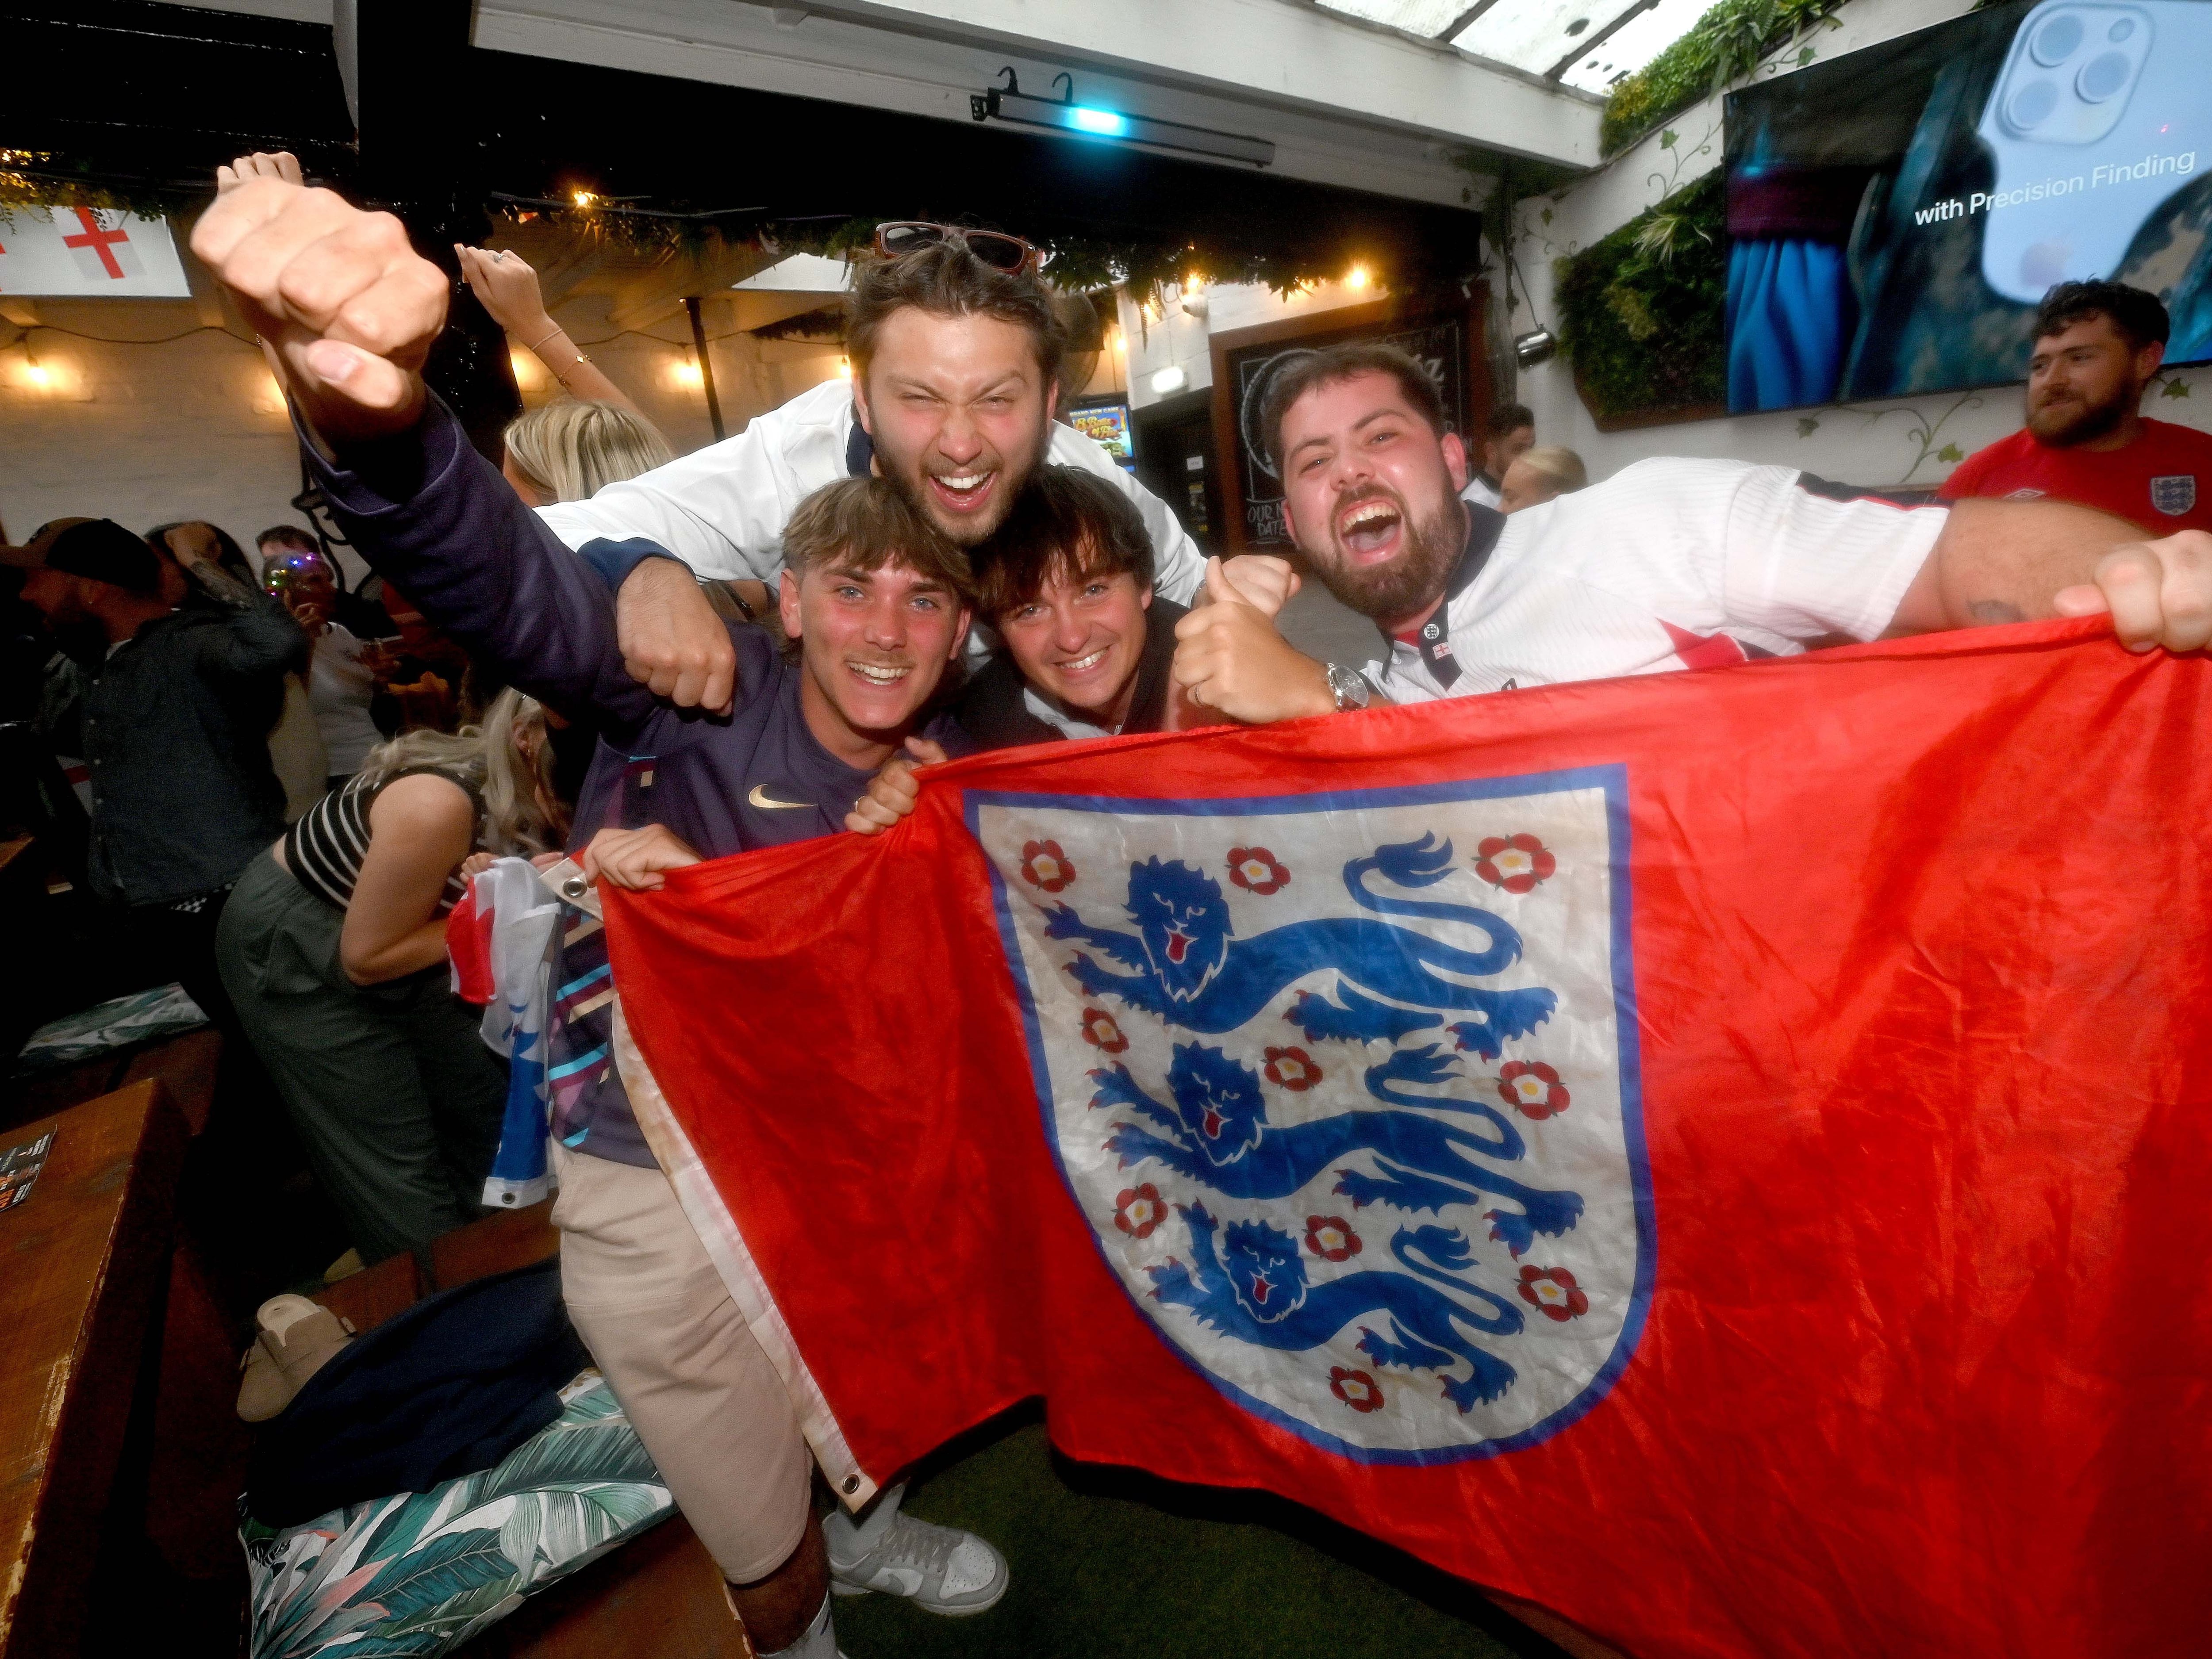 Watch: 'I went to watch England and fans went on an emotional rollercoaster from despair to elation'